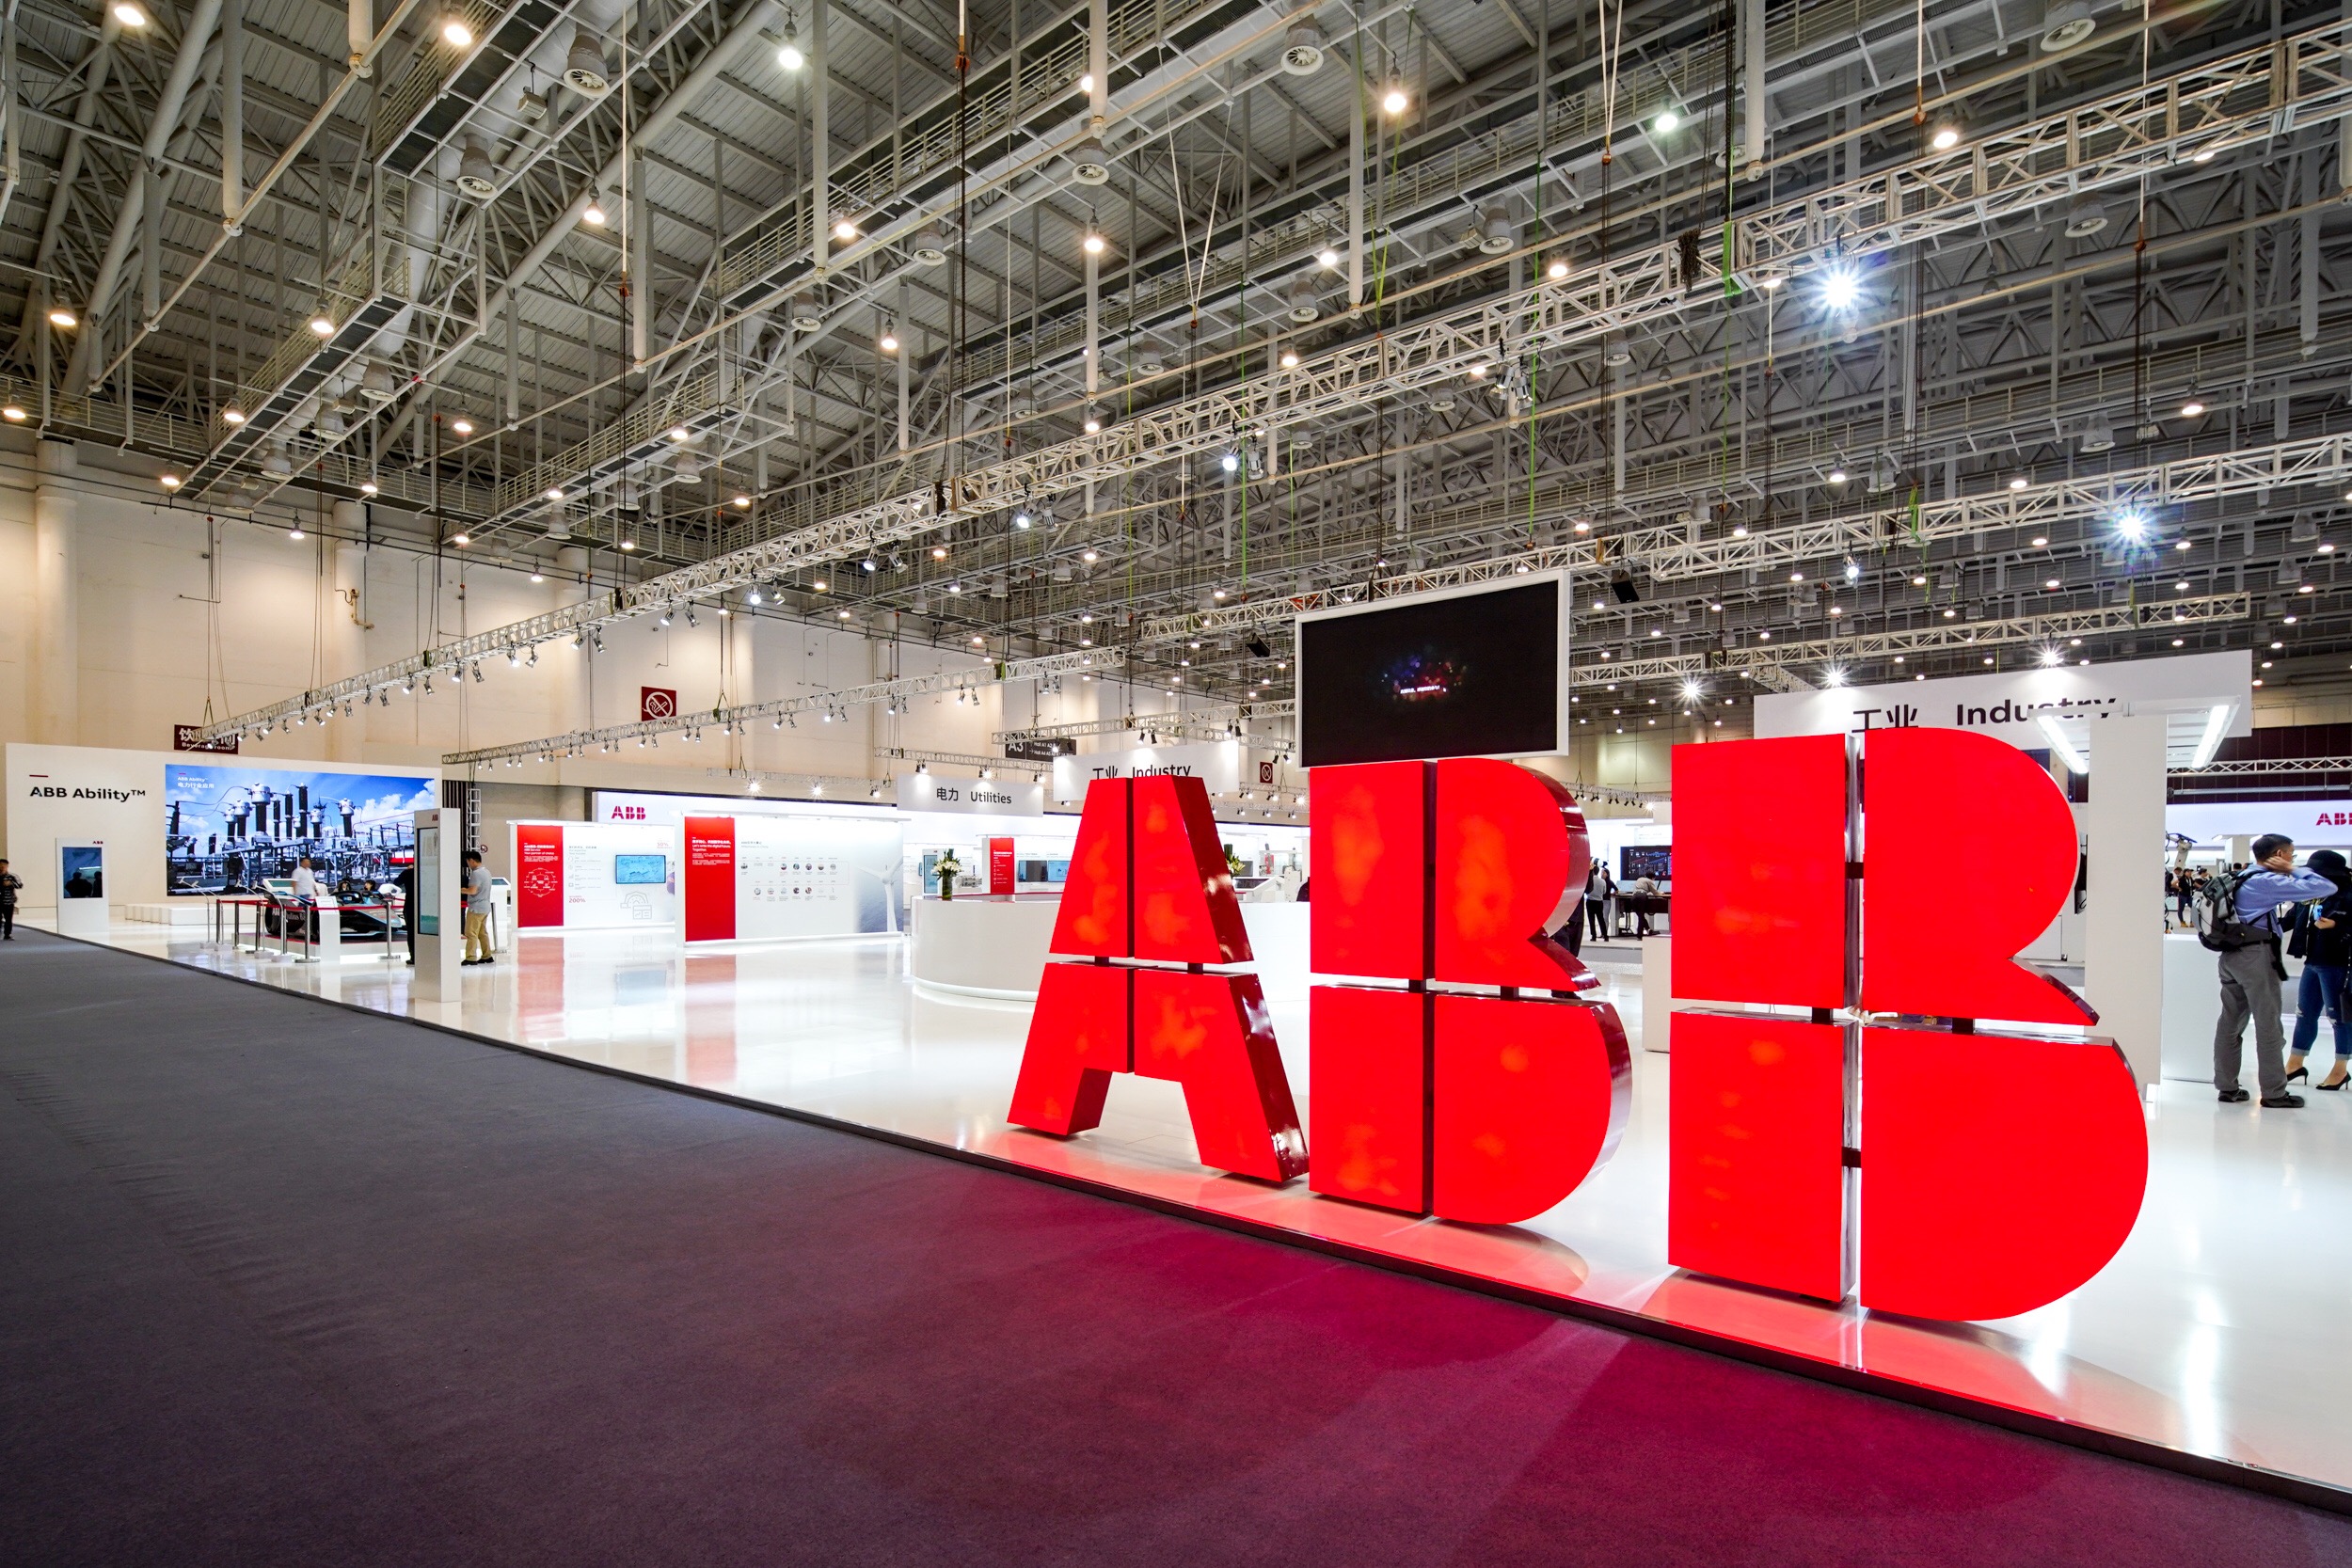 ABB Fights Ocean Pollution | Polluting The Waters | Pcsopep